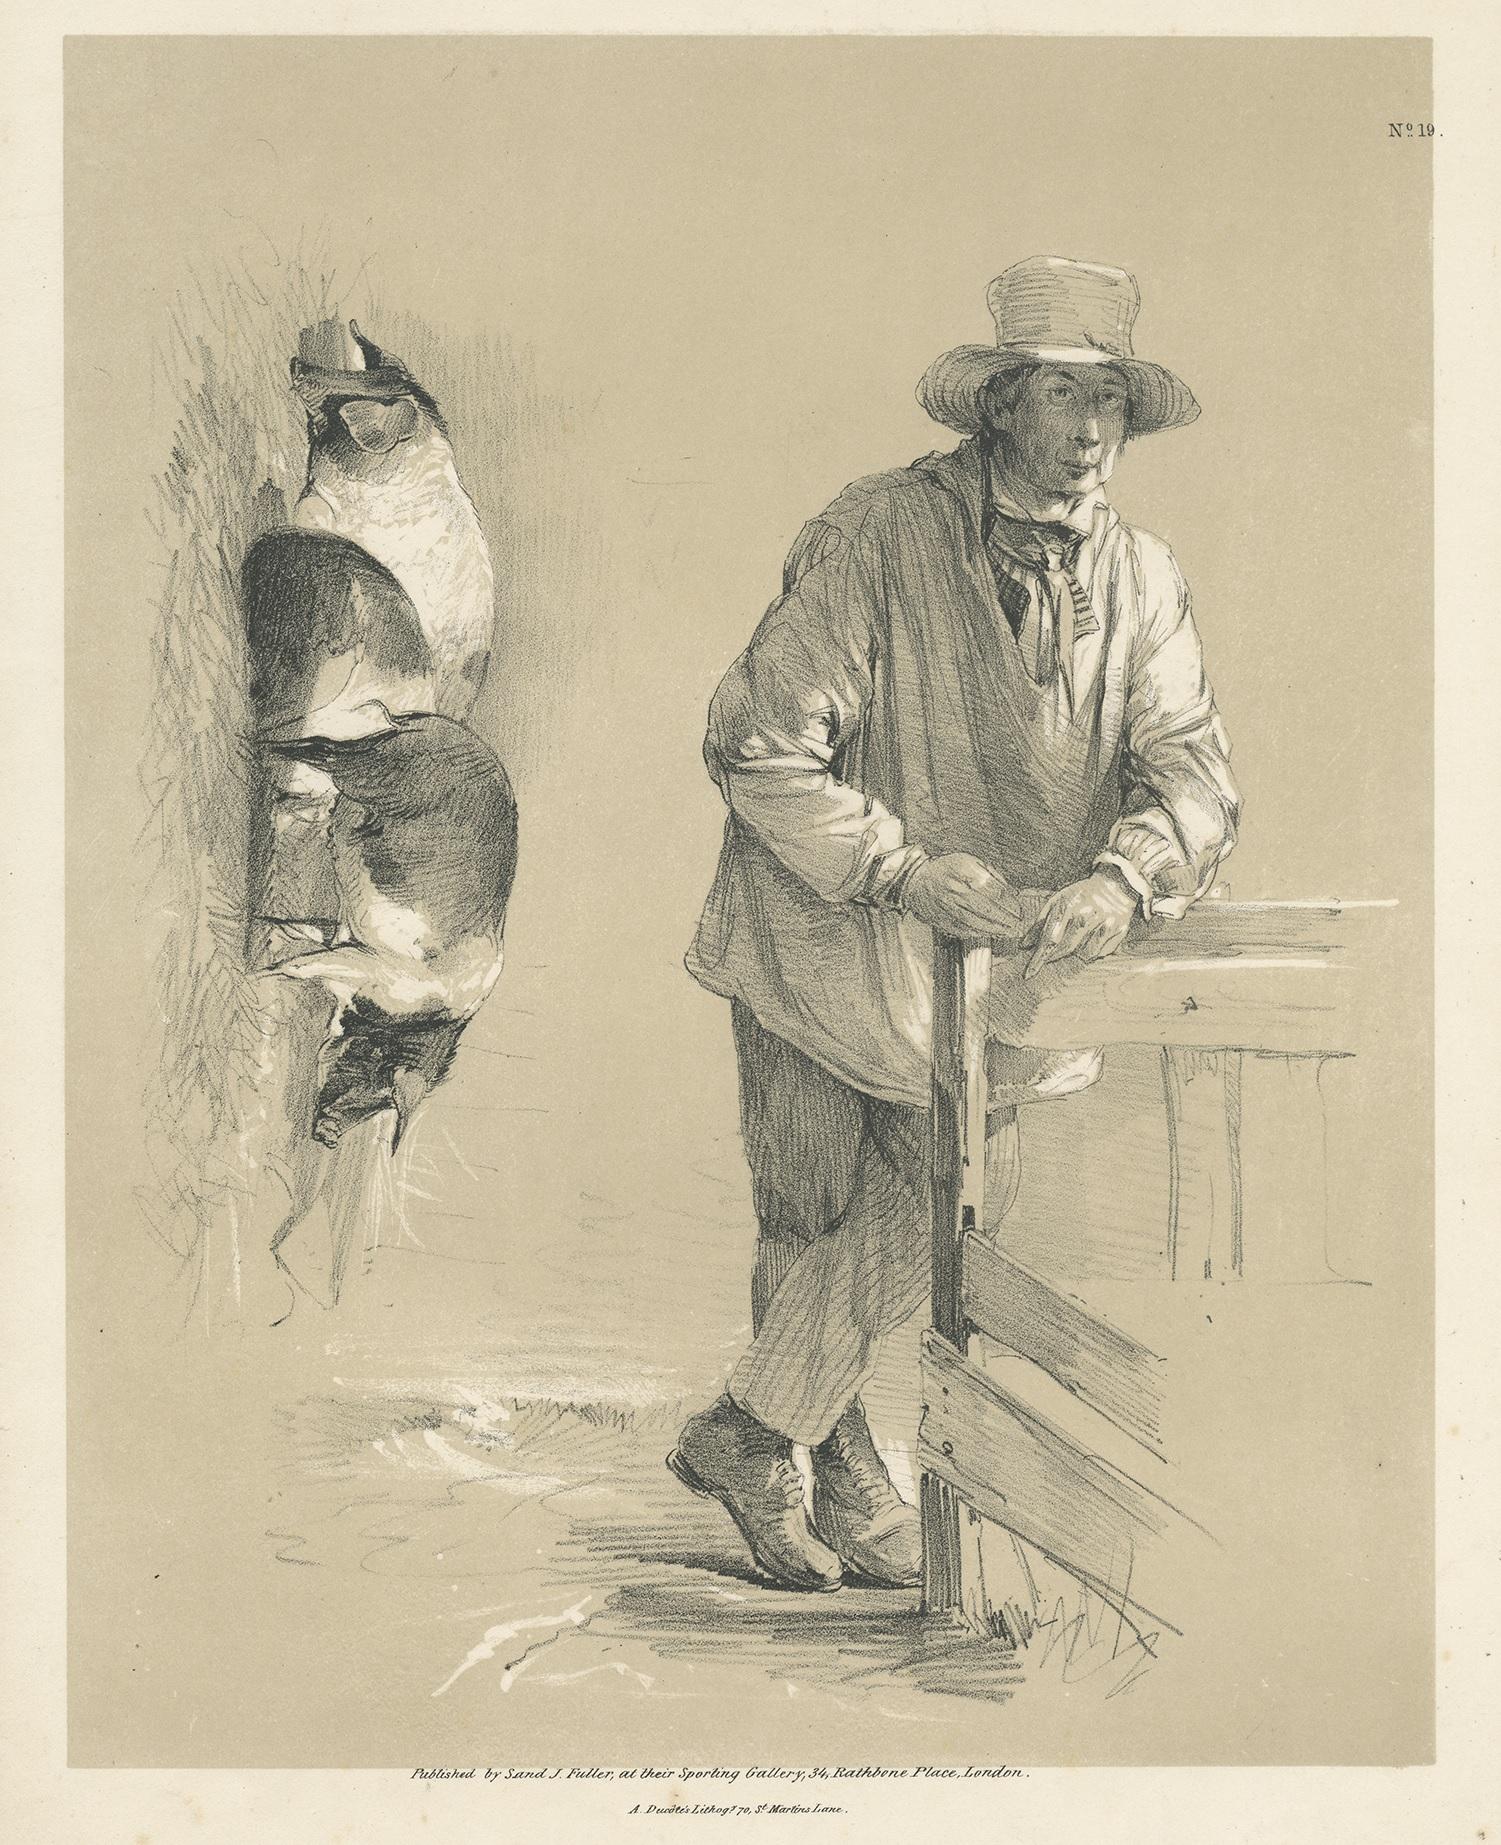 Tinted lithograph of pigs and a farmer. Published by Sand J. Fuller at their Sporting Gallery, 34, Rathbone Place, London. Lithographed by Ducôte.